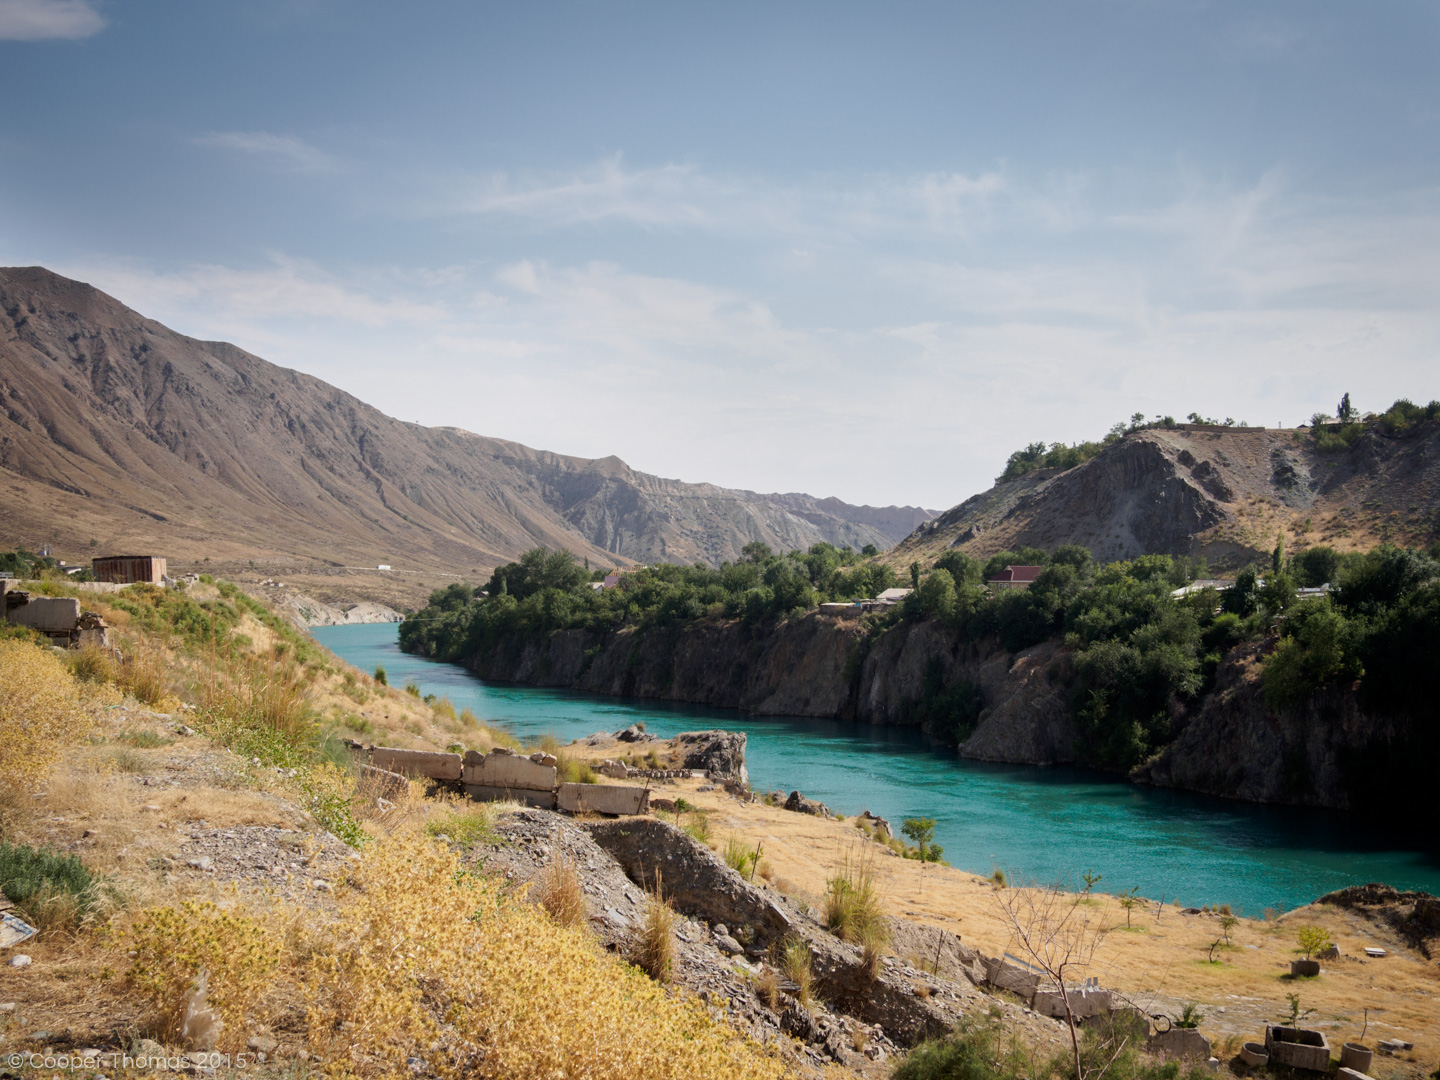 Driving along the Naryn River